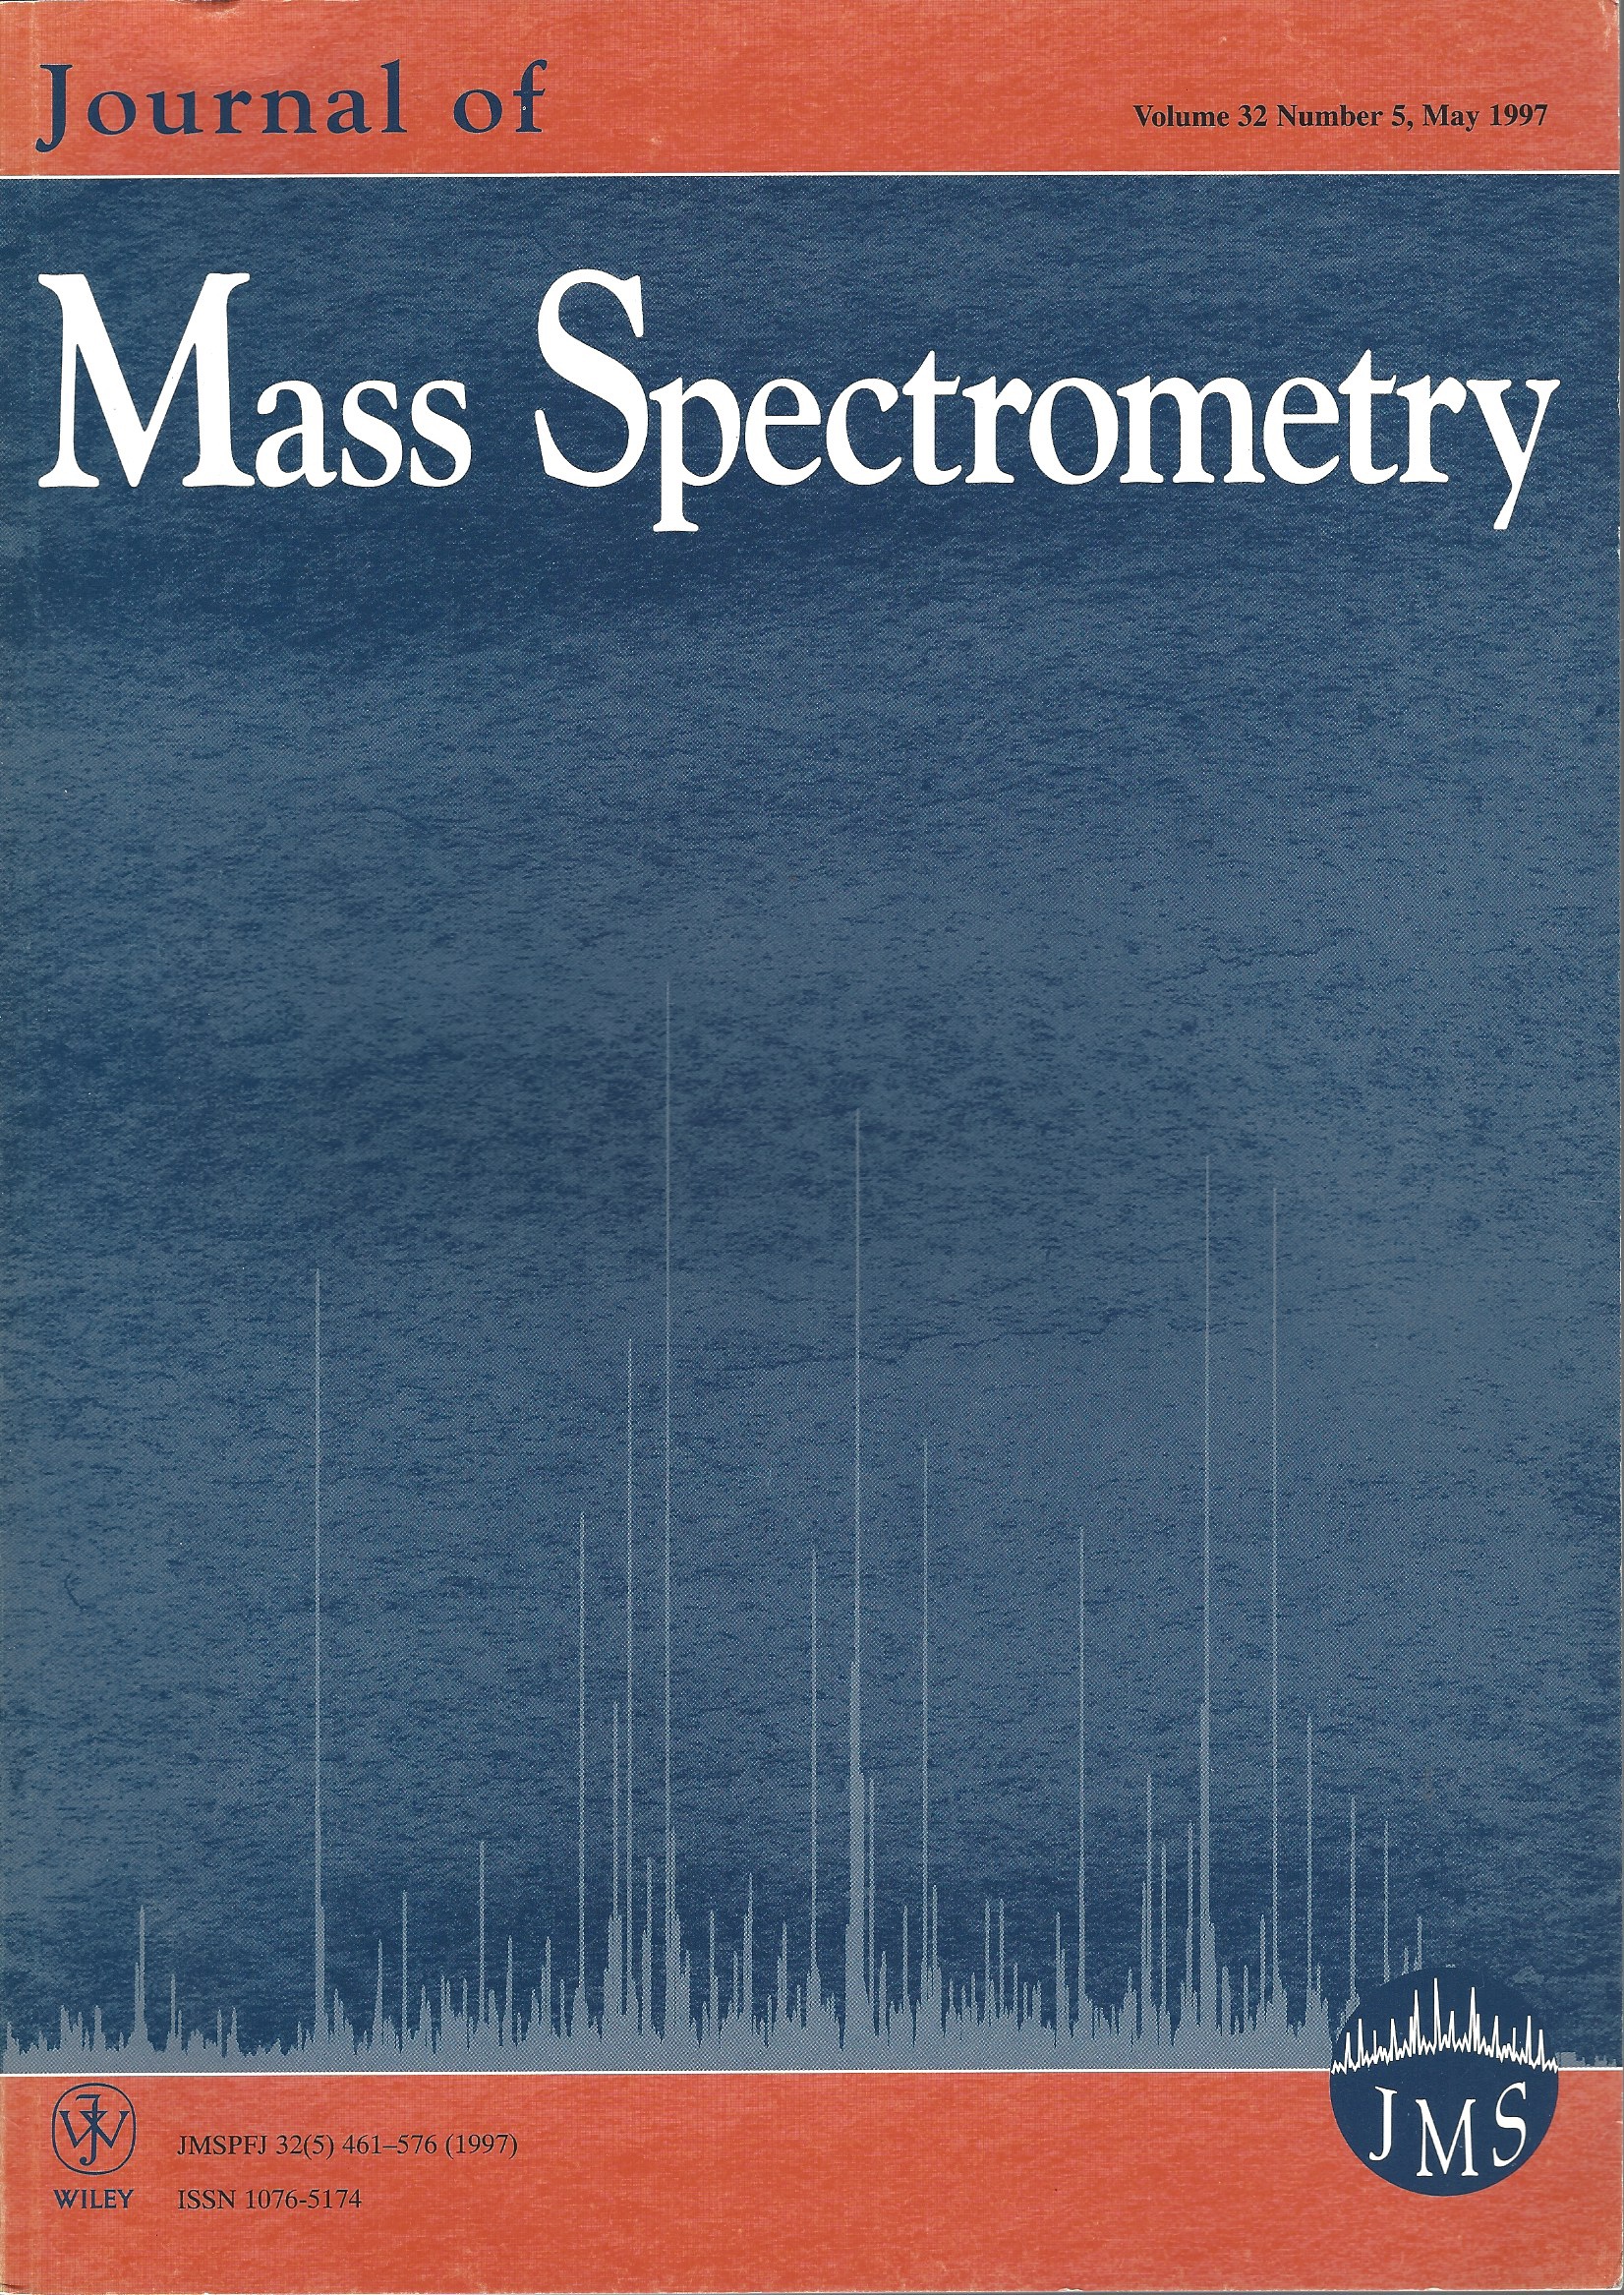 CAPRIOLI RICHARD M. ( EDITOR-IN -CHIEF) - Journal of Mass Spectrometry: Volume 32, Number 5, May 1997